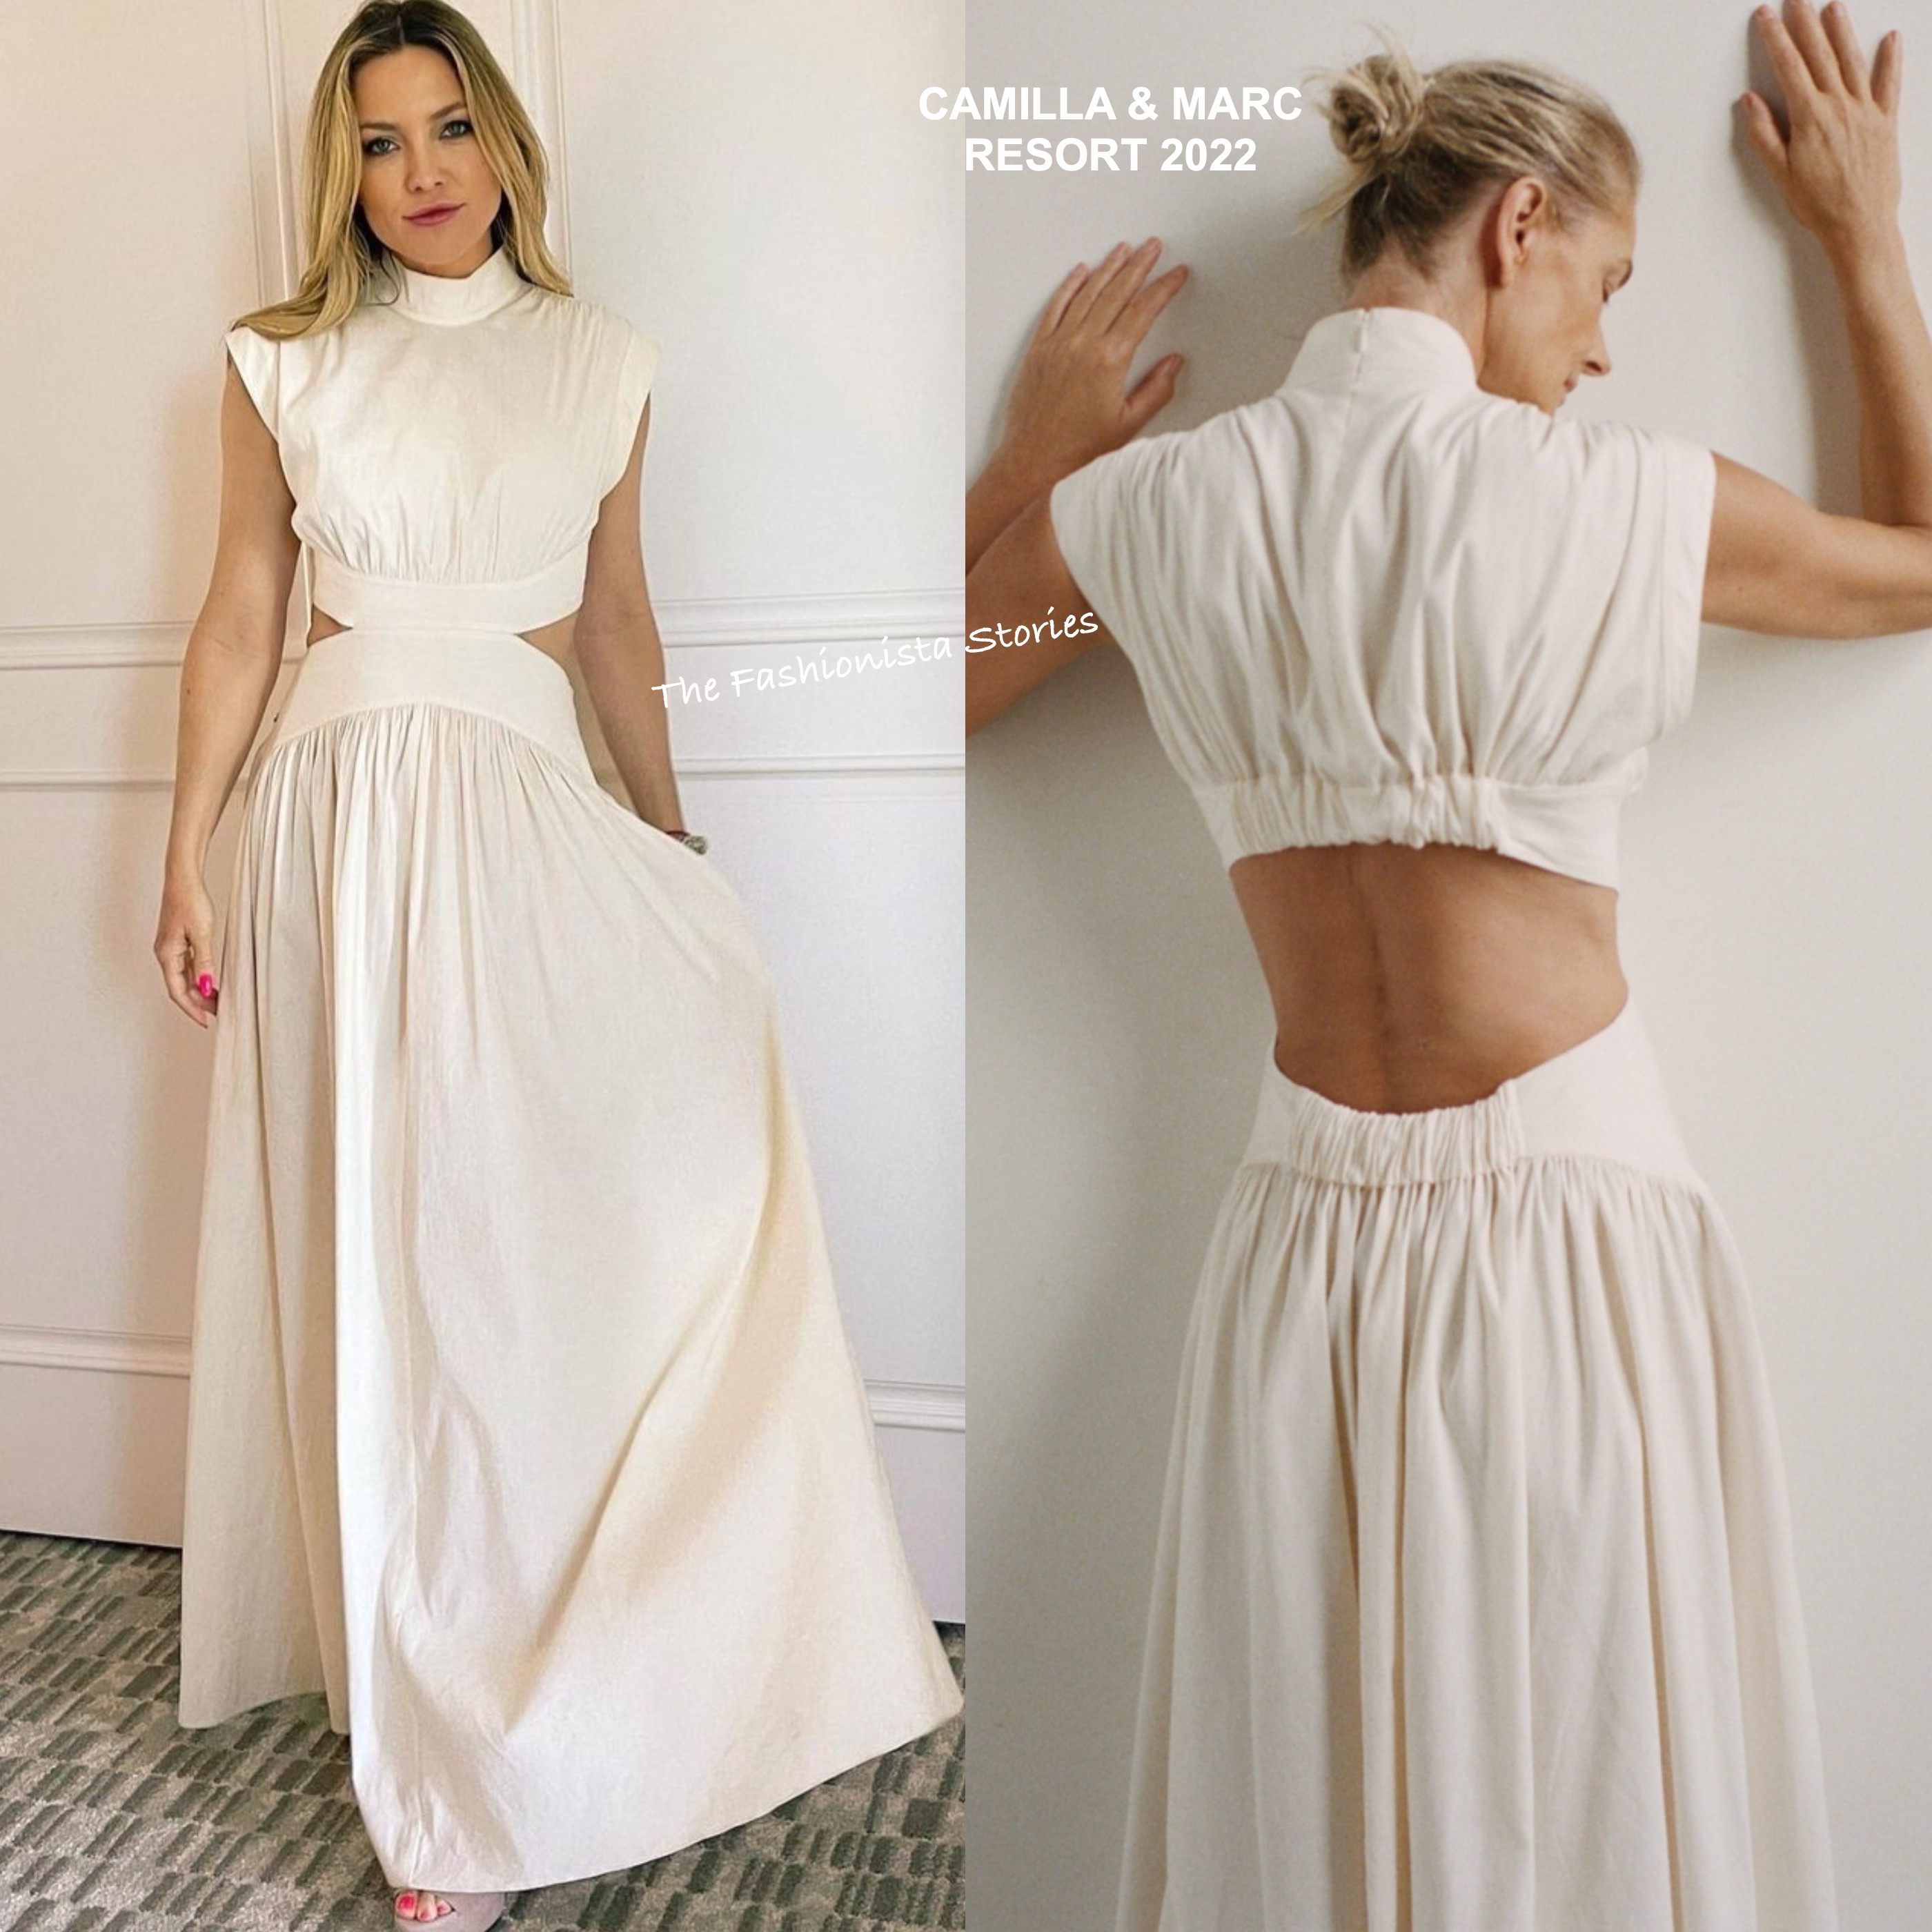 Instagram Style: Kate Hudson in Camilla & Marc